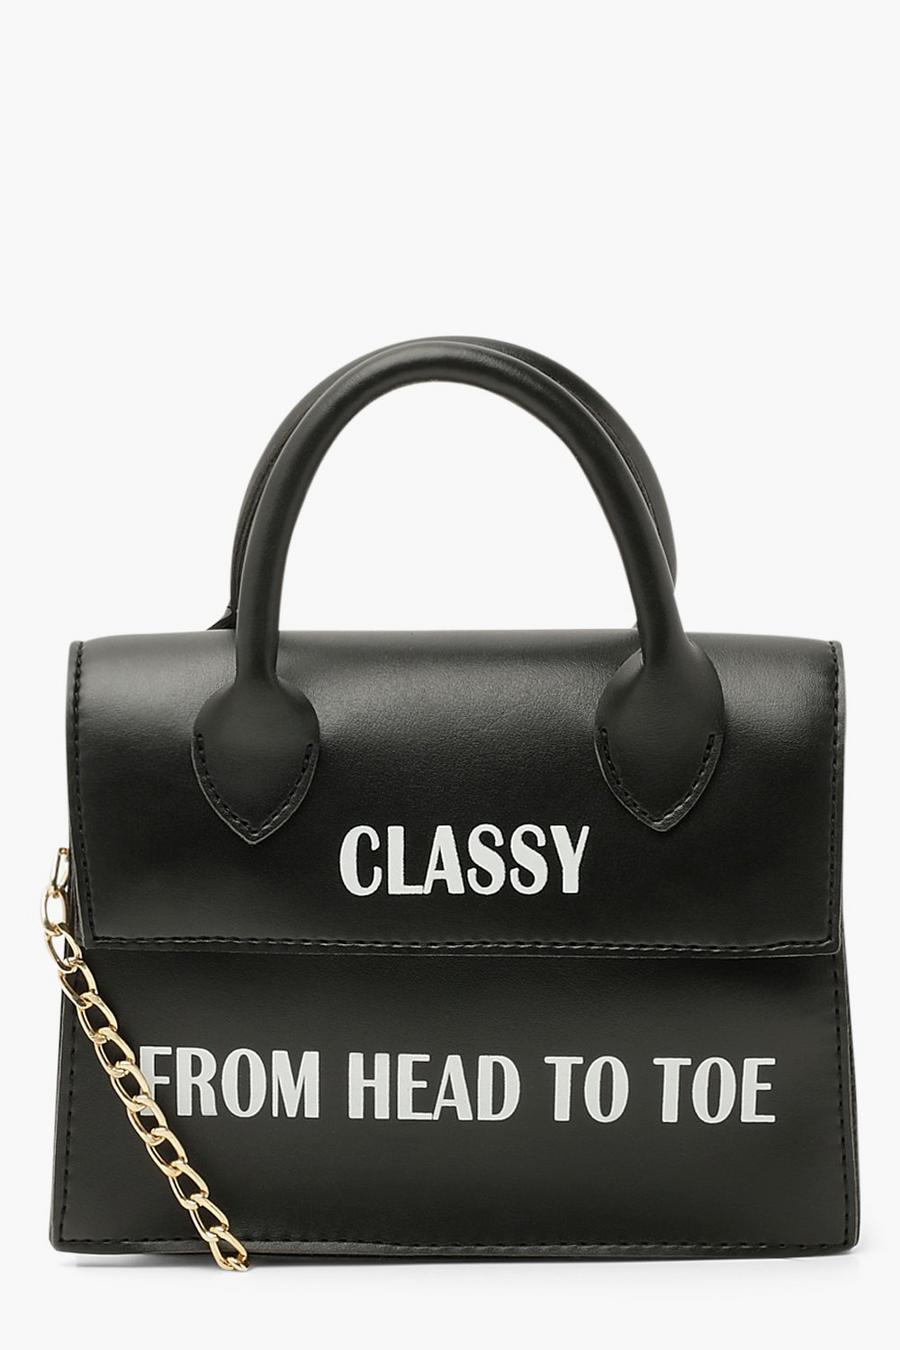 Classy From Head To Toe Slogan Crossbody Bag image number 1